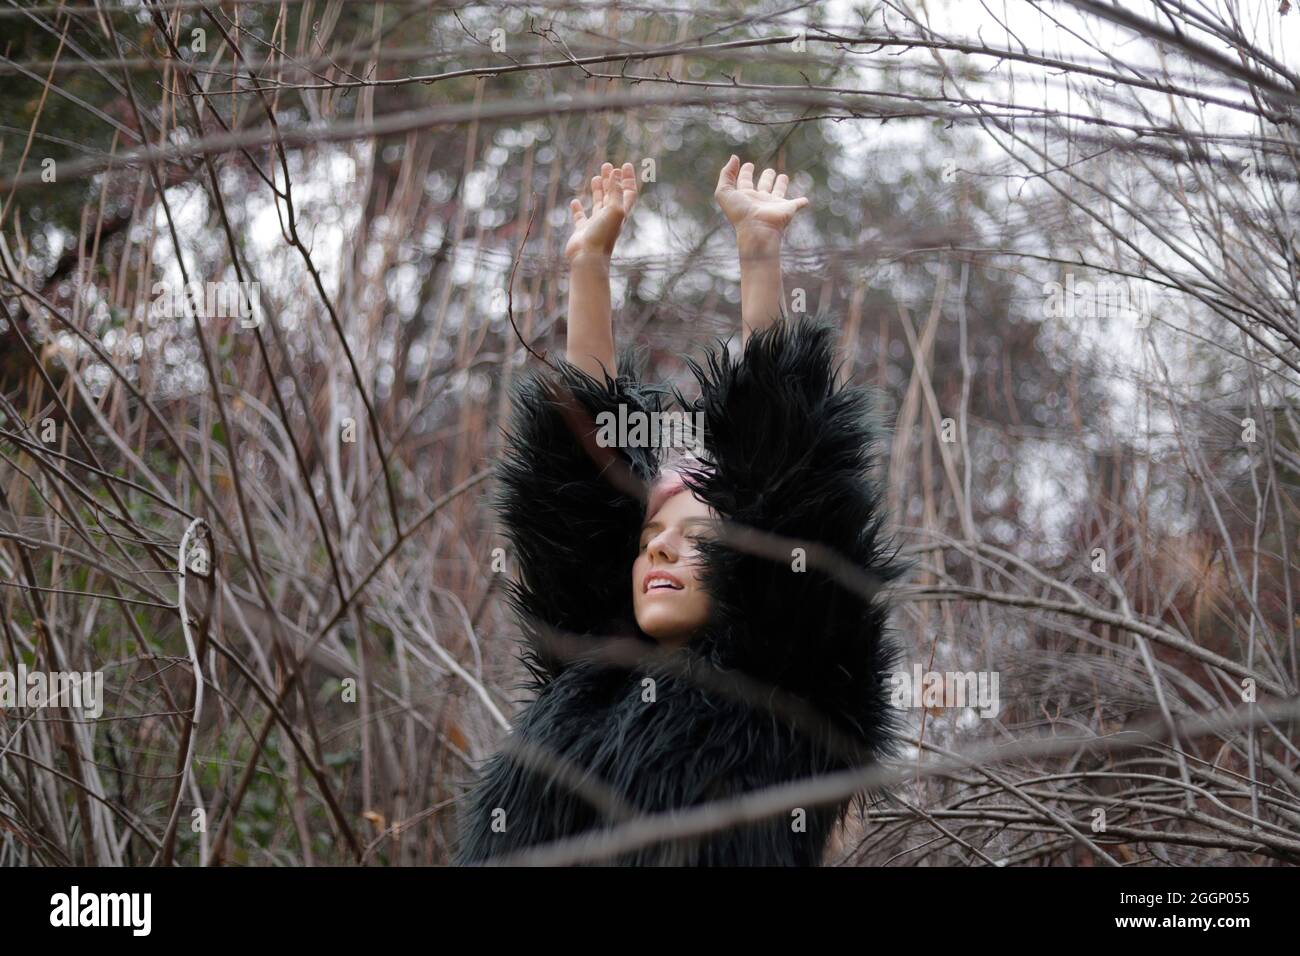 woman in fashionable coat raising her arms and breathing the winter air Stock Photo